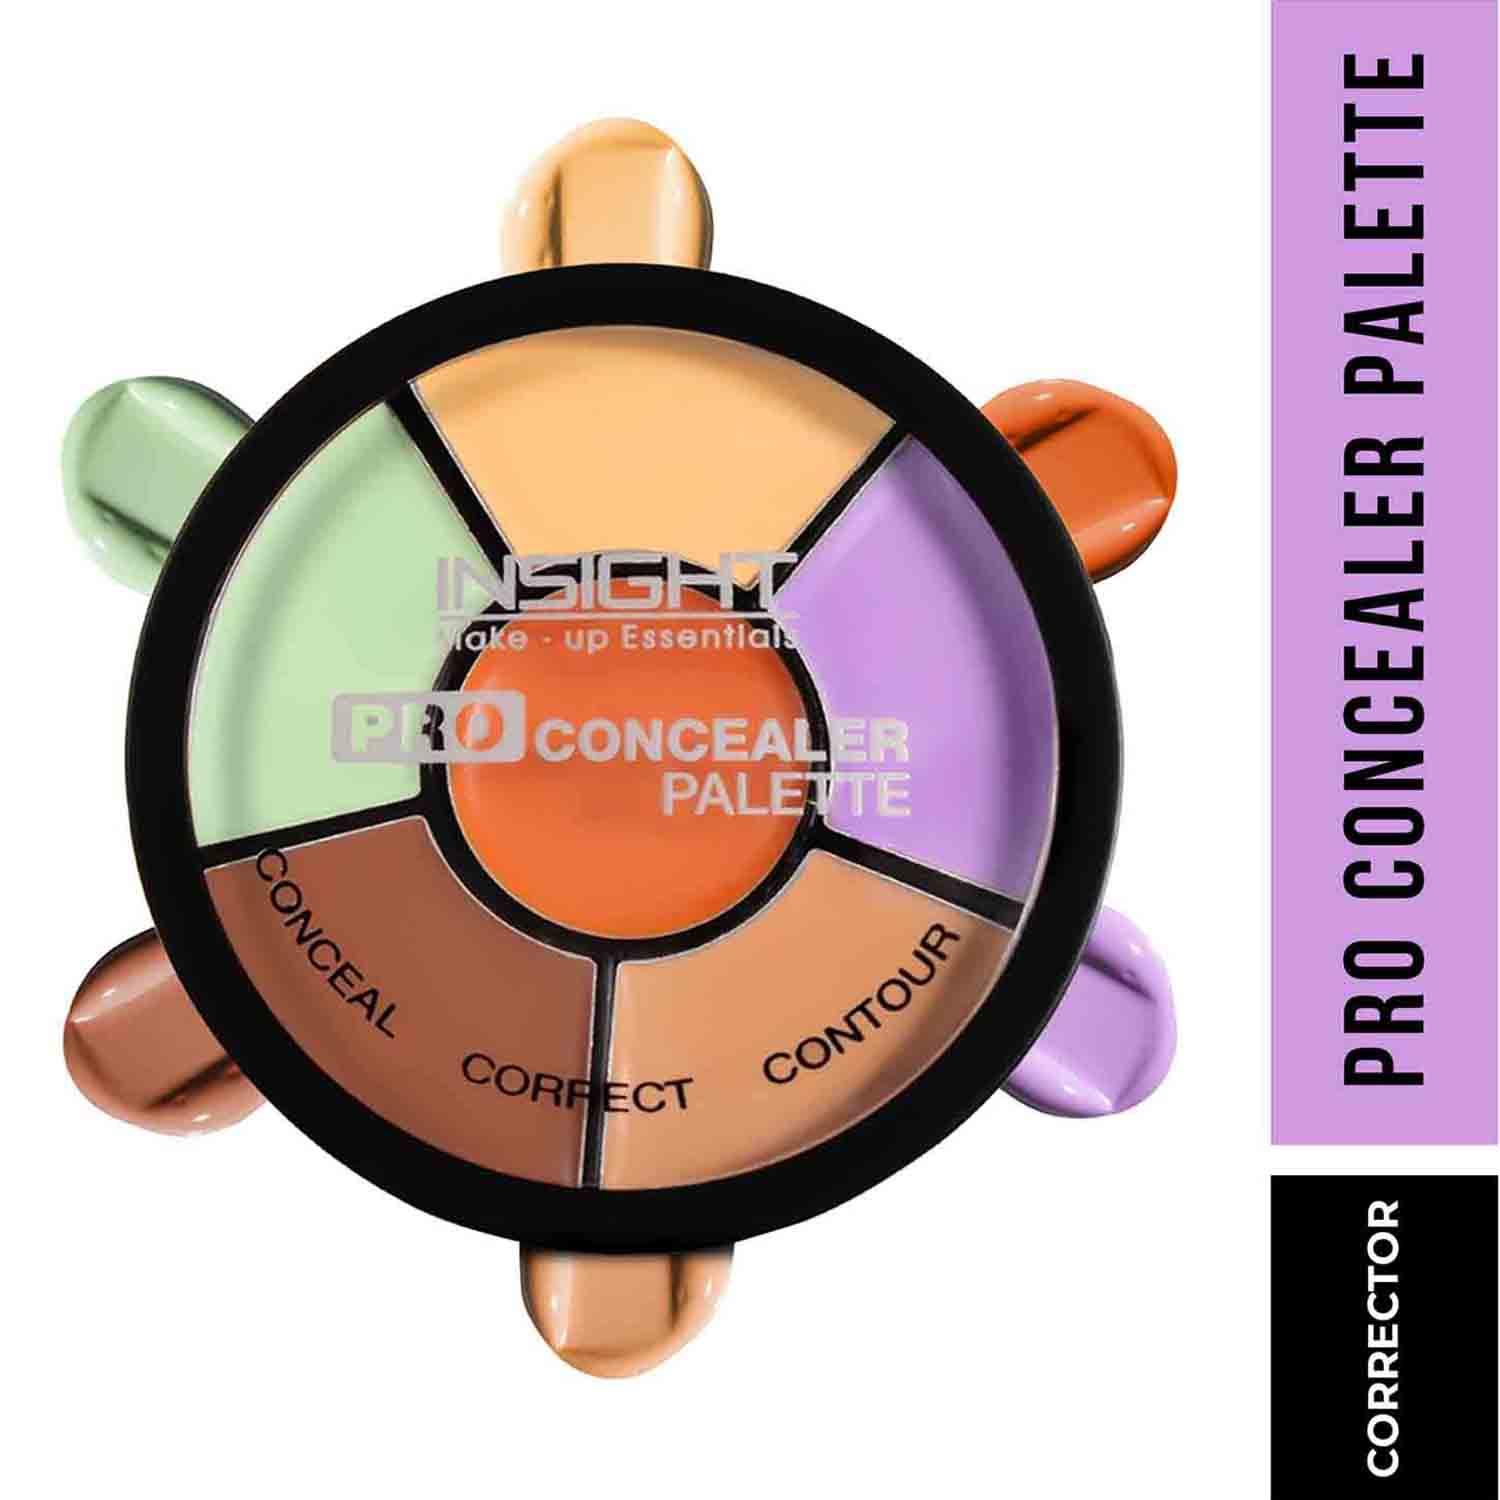 Insight Cosmetics | Insight Cosmetics Pro Concealer Palette - Corrector (15g)